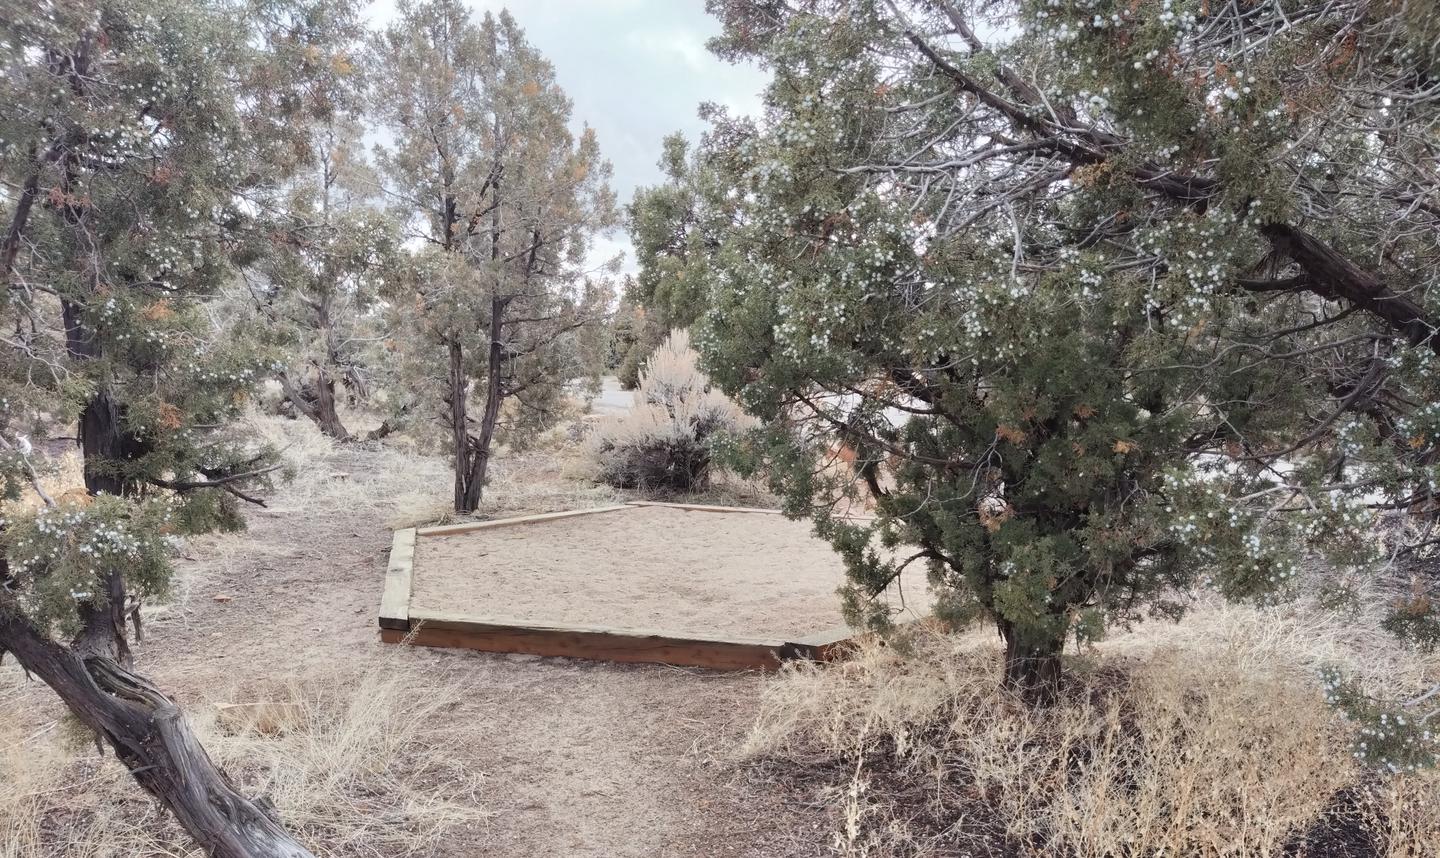 A small tent pad surrounded by forest.Site 10 has a tent pad, a picnic table and a metal fire ring. The site is surrounded by a pinon-juniper forest.